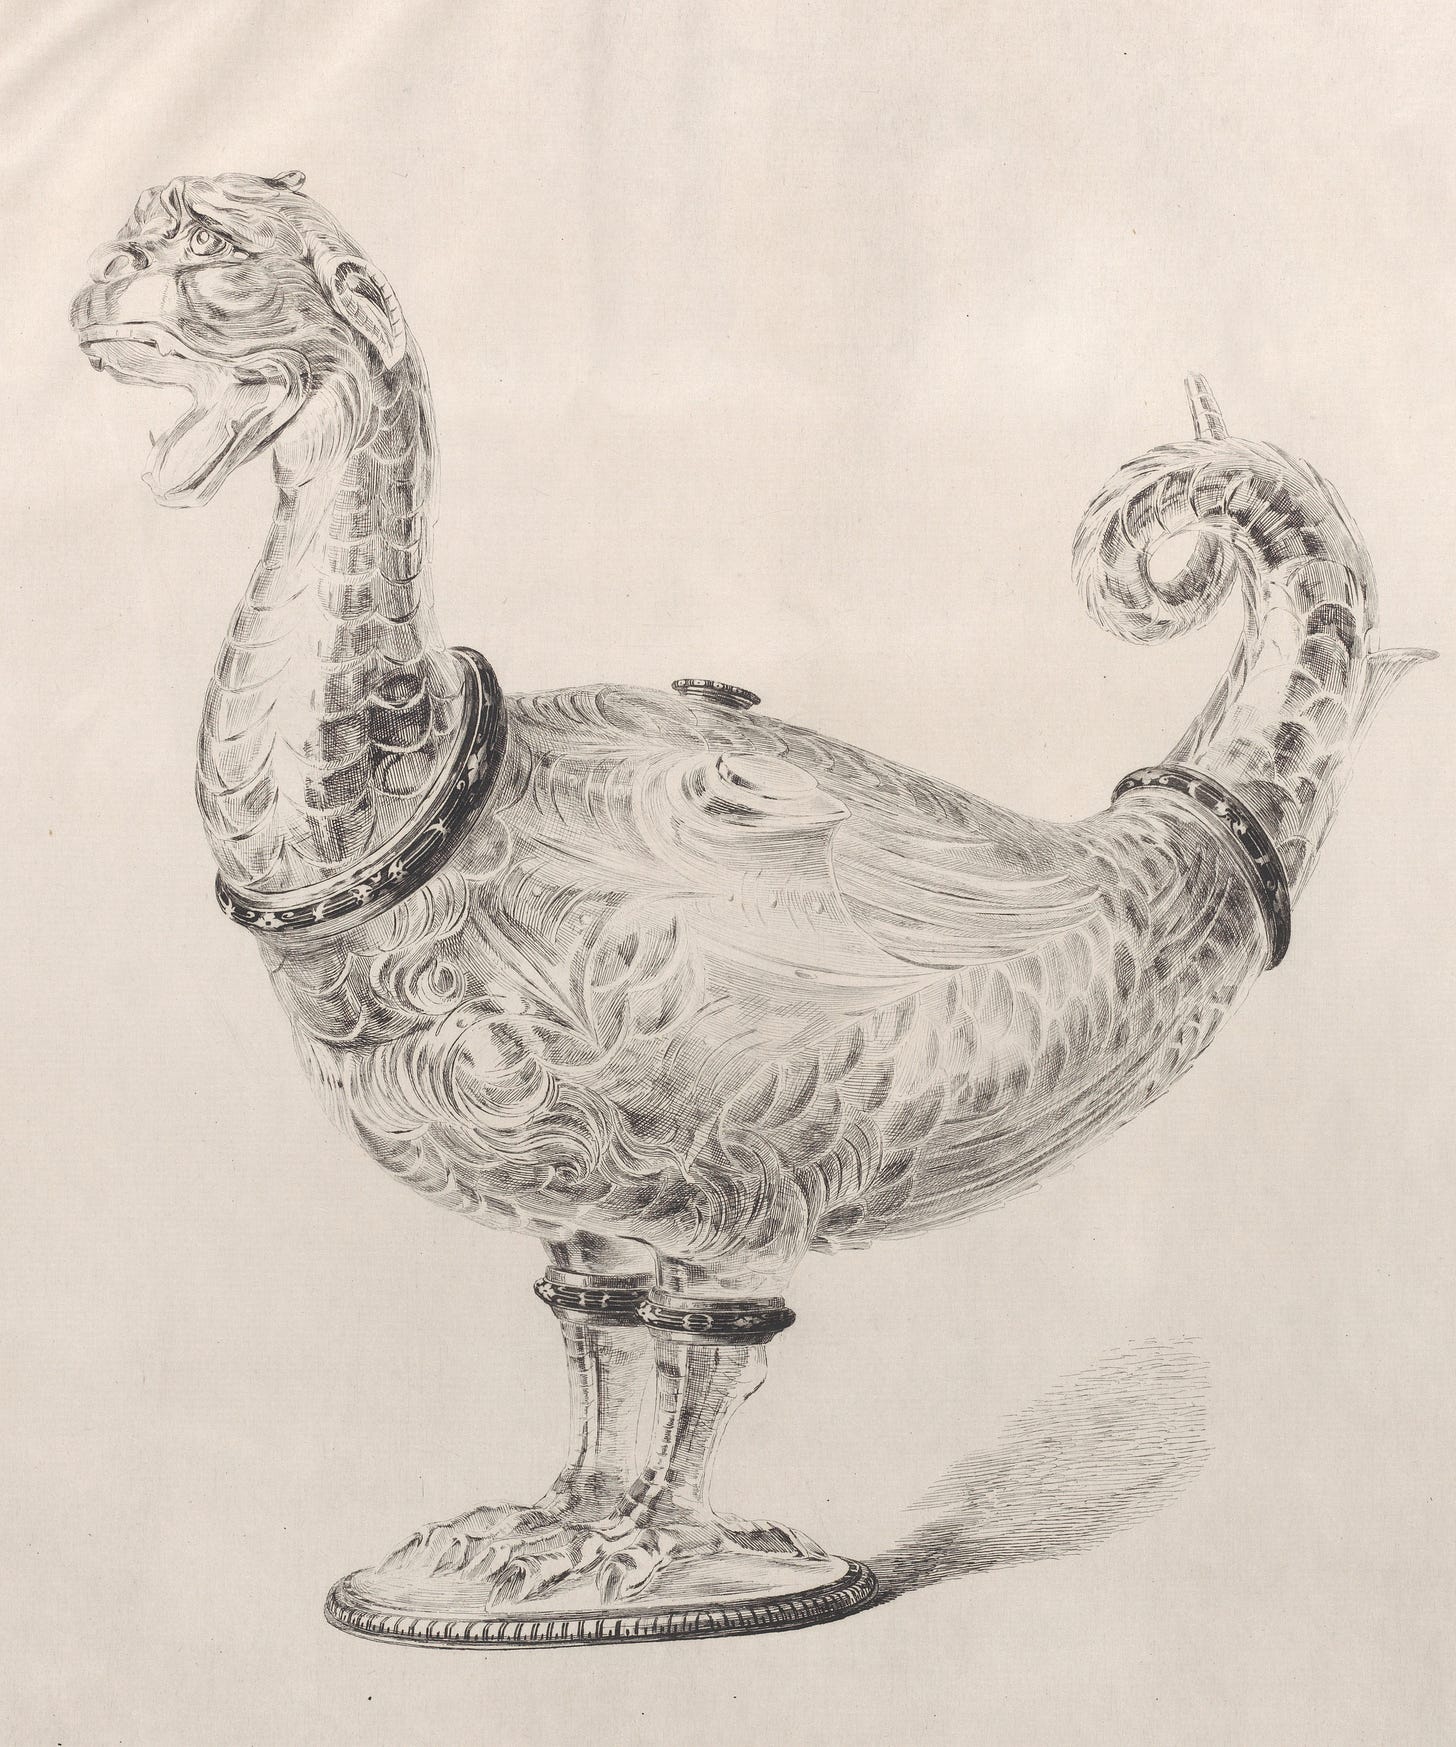 Black and white illustration of a crystal ewer shaped like a dog headed bird.